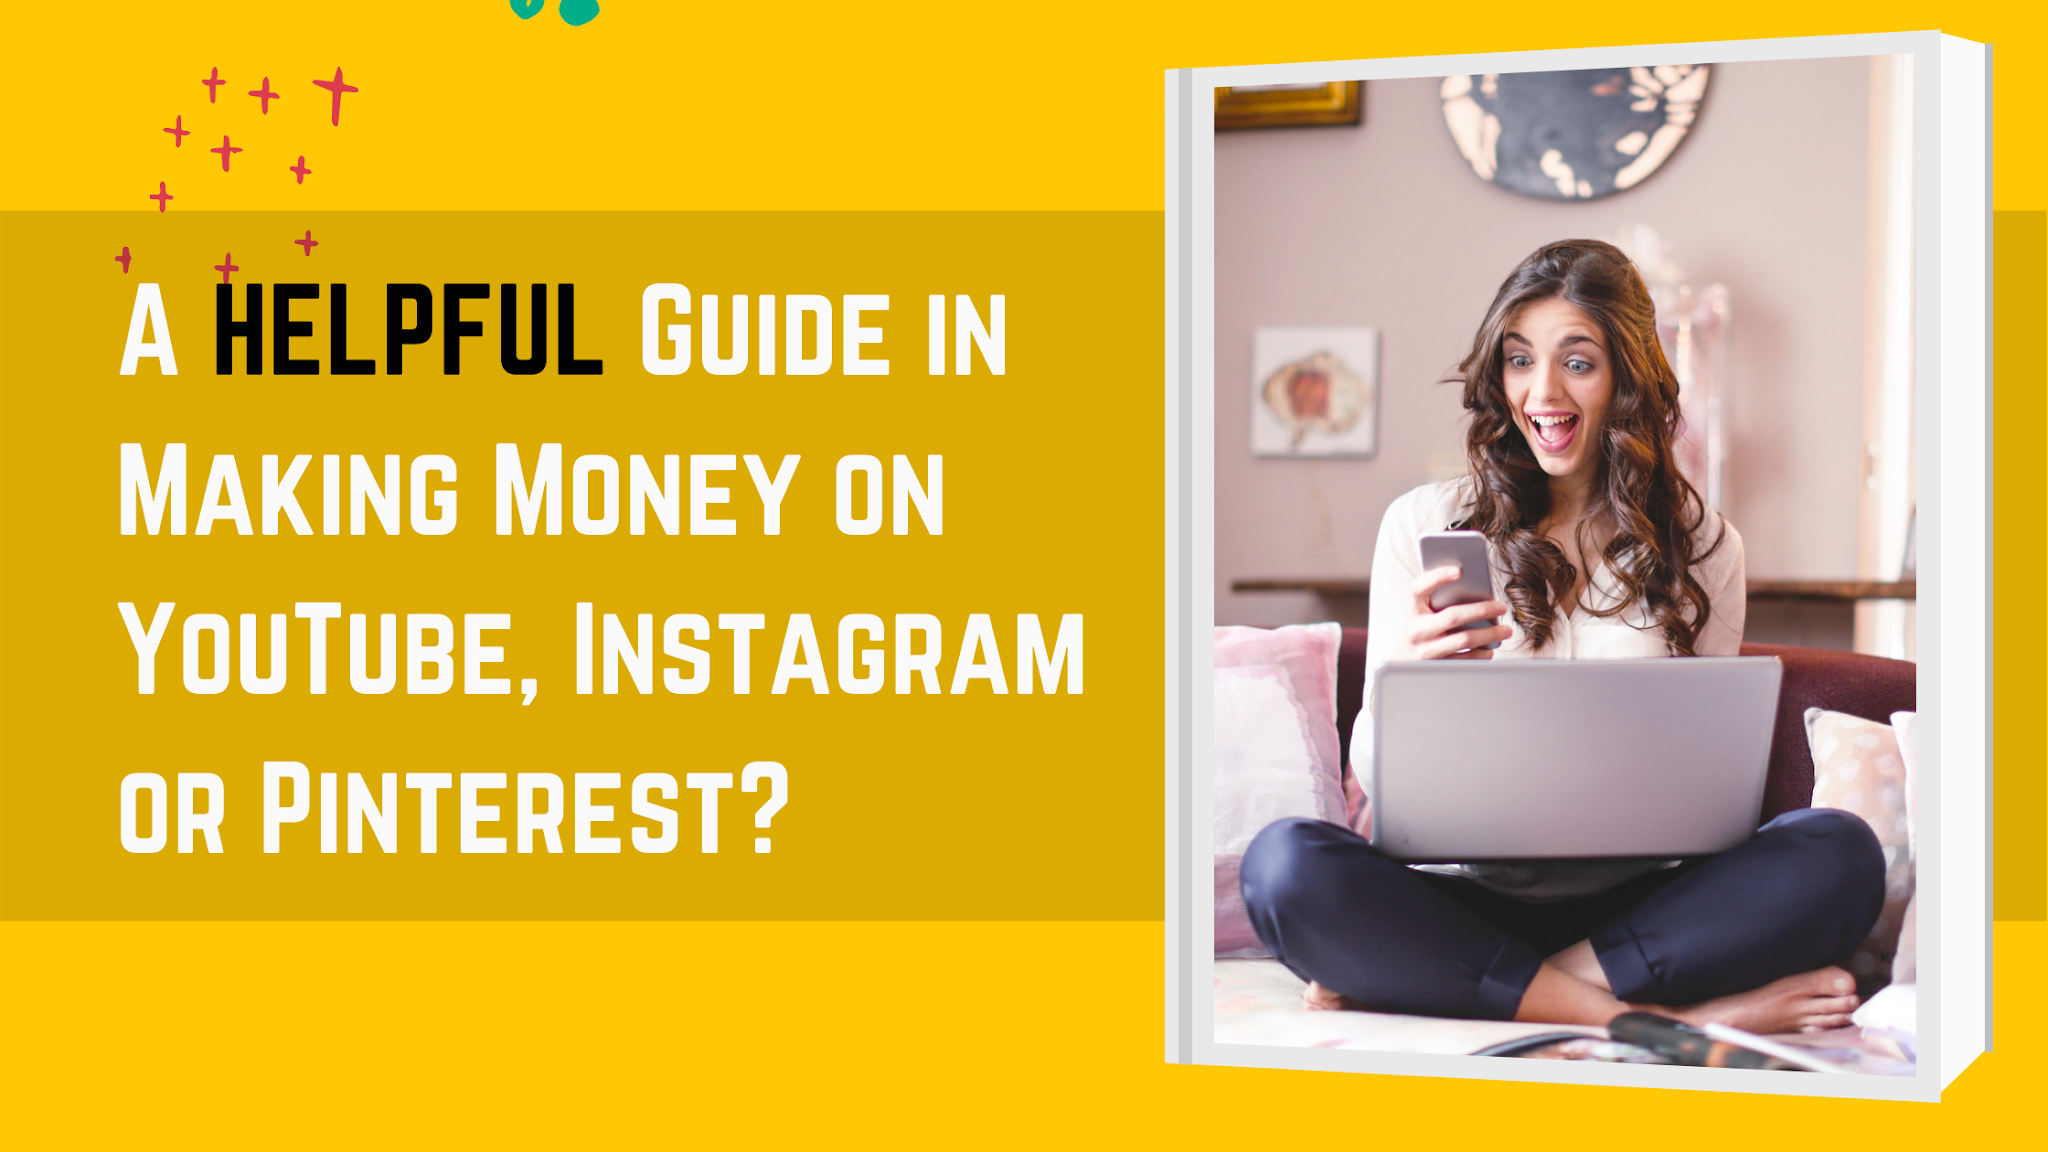 A Helpful Guide in Making Money on YouTube, Instagram or Pinterest?